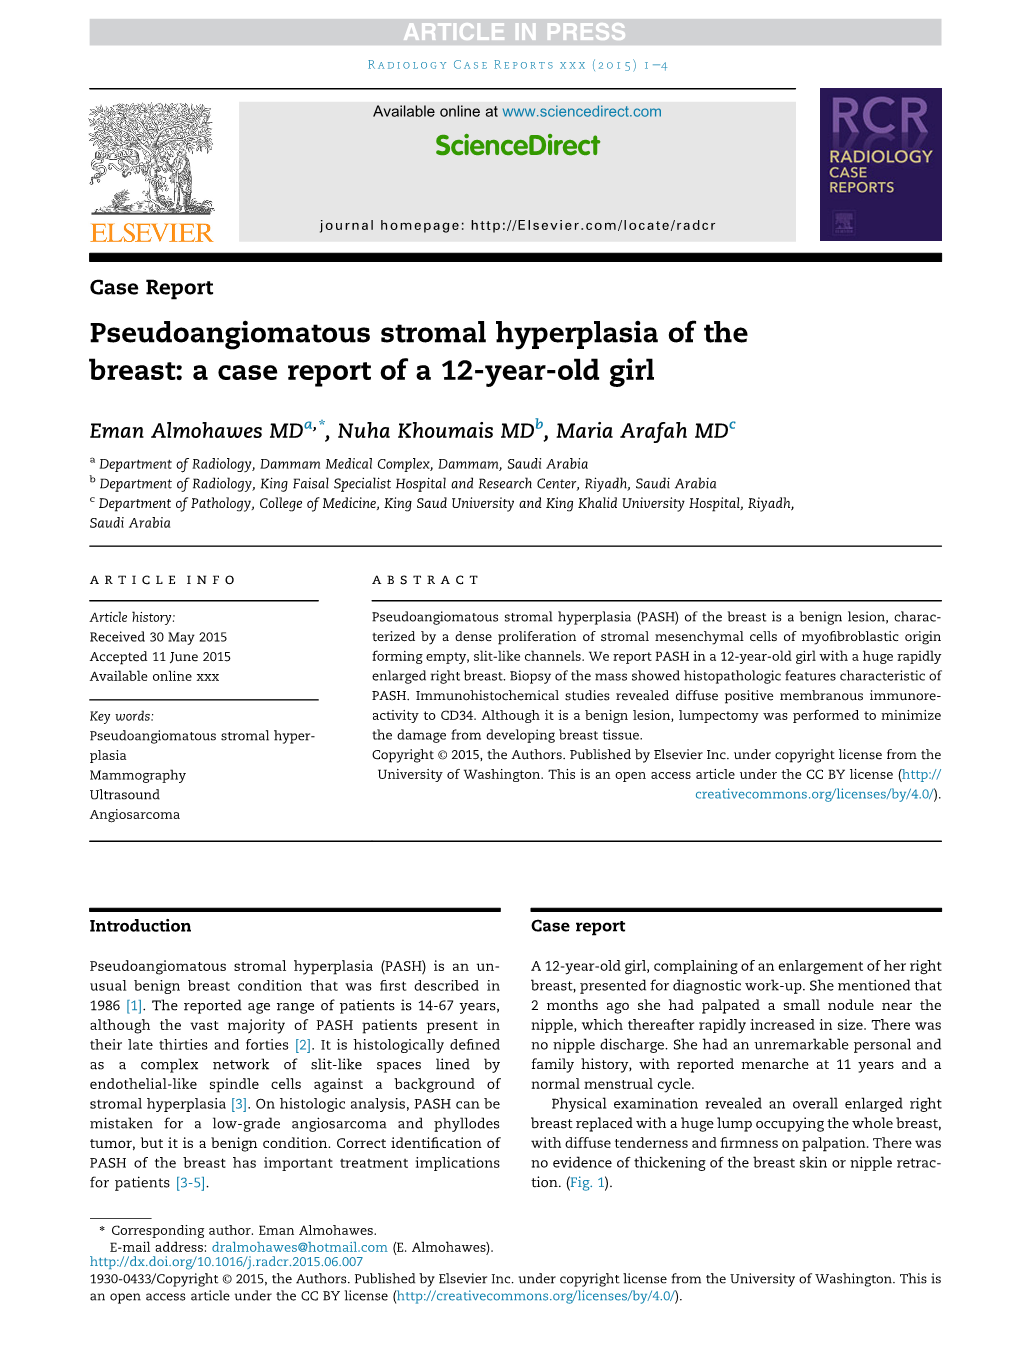 Pseudoangiomatous Stromal Hyperplasia of the Breast: a Case Report of a 12-Year-Old Girl